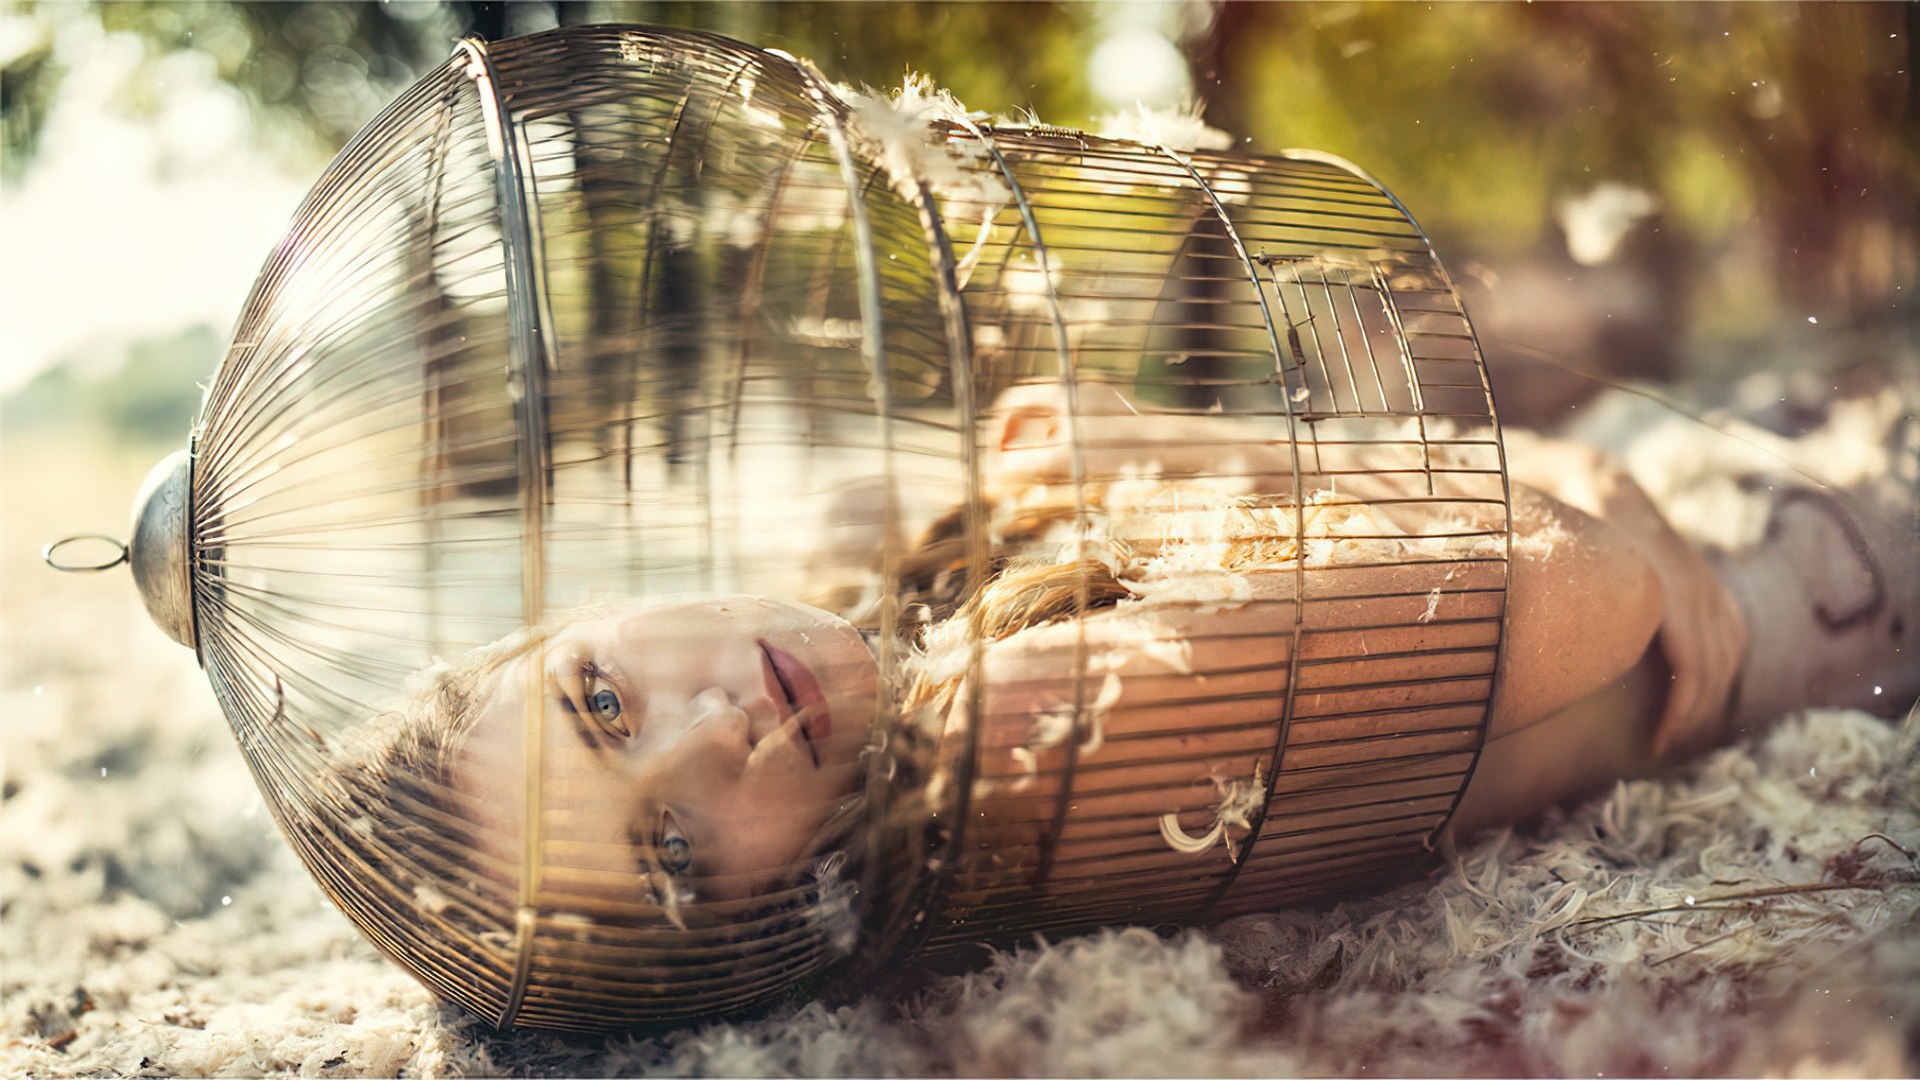 women, model, blonde, blue eyes, cage, feather, outdoor